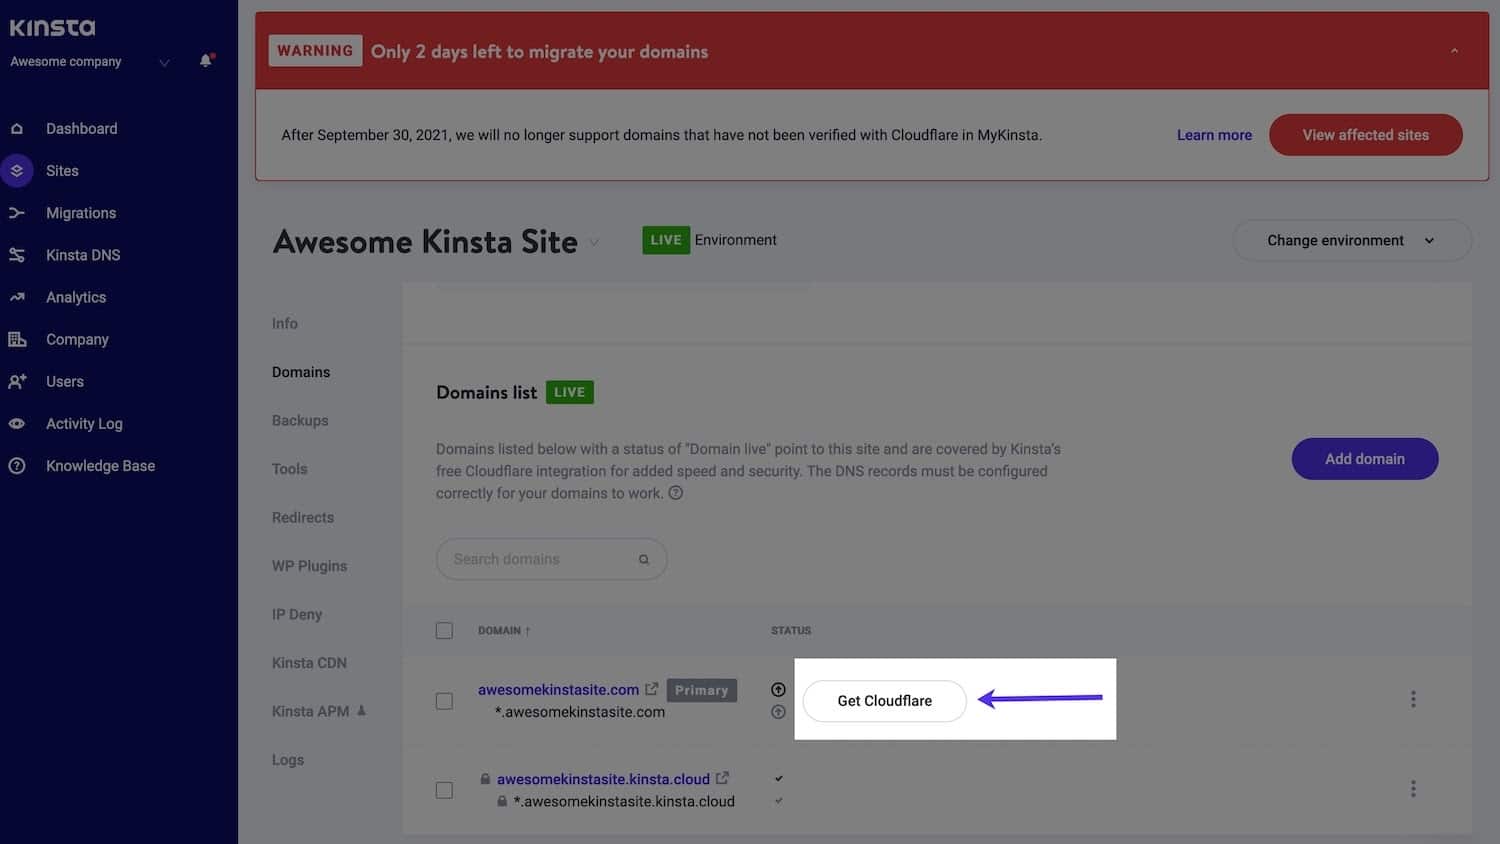 Get Cloudflare button beside domain in MyKinsta Domains list.